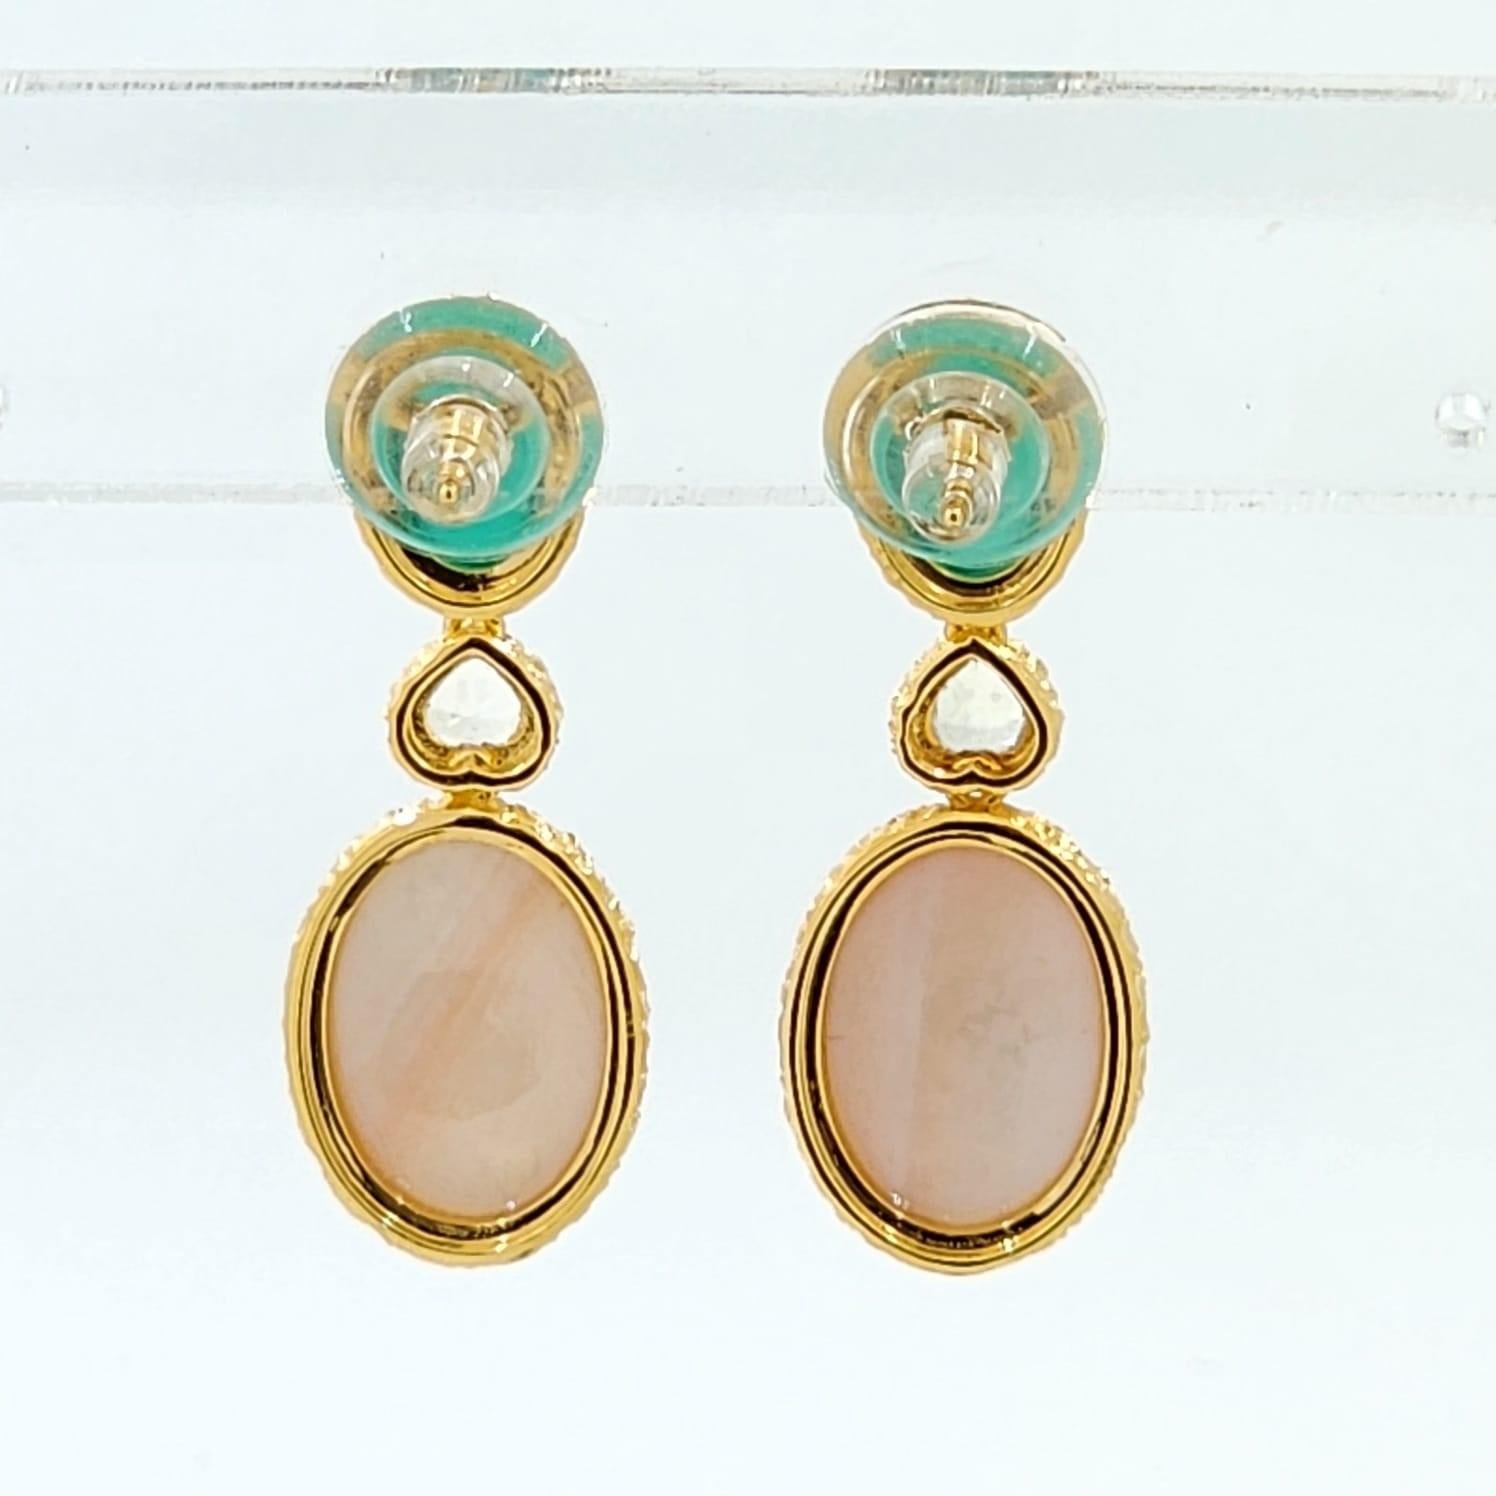 Cabochon Green Agate and Pink Shell Drop Earring in 18K Gold Vermeil Sterling Silver